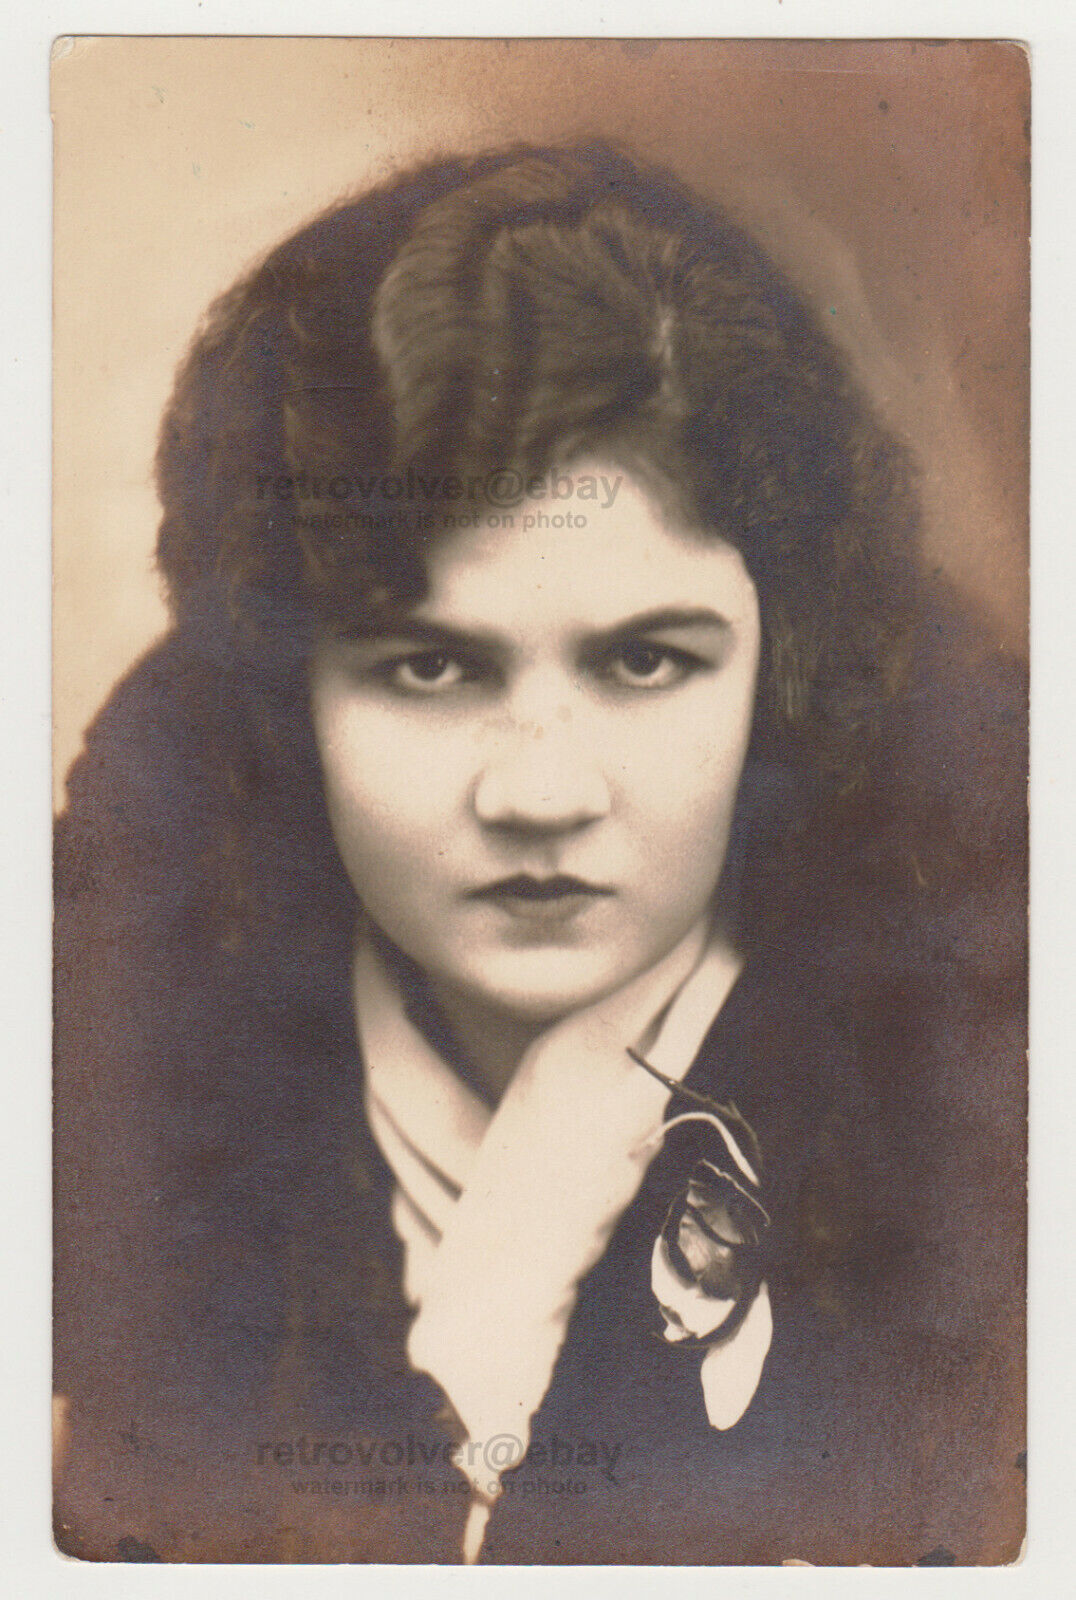 Pretty Cute Angry Young Woman Charming Attractive Lady Girl Snapshot Old Photo